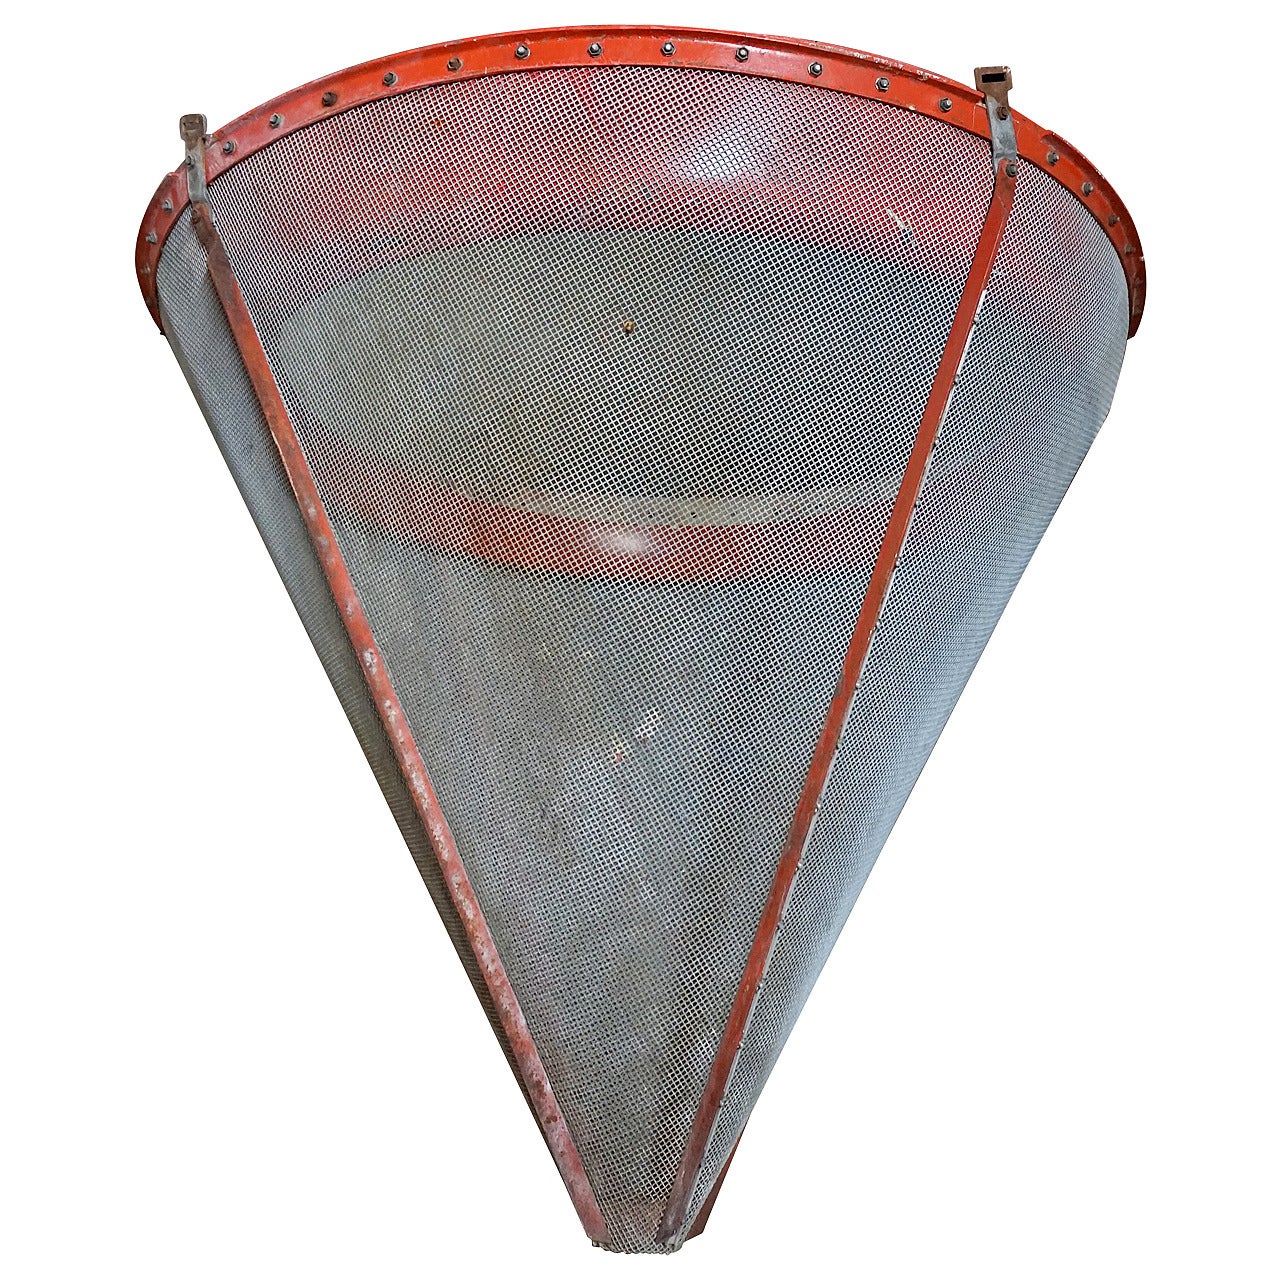 Giant Industrial Sieve or Strainer For Sale